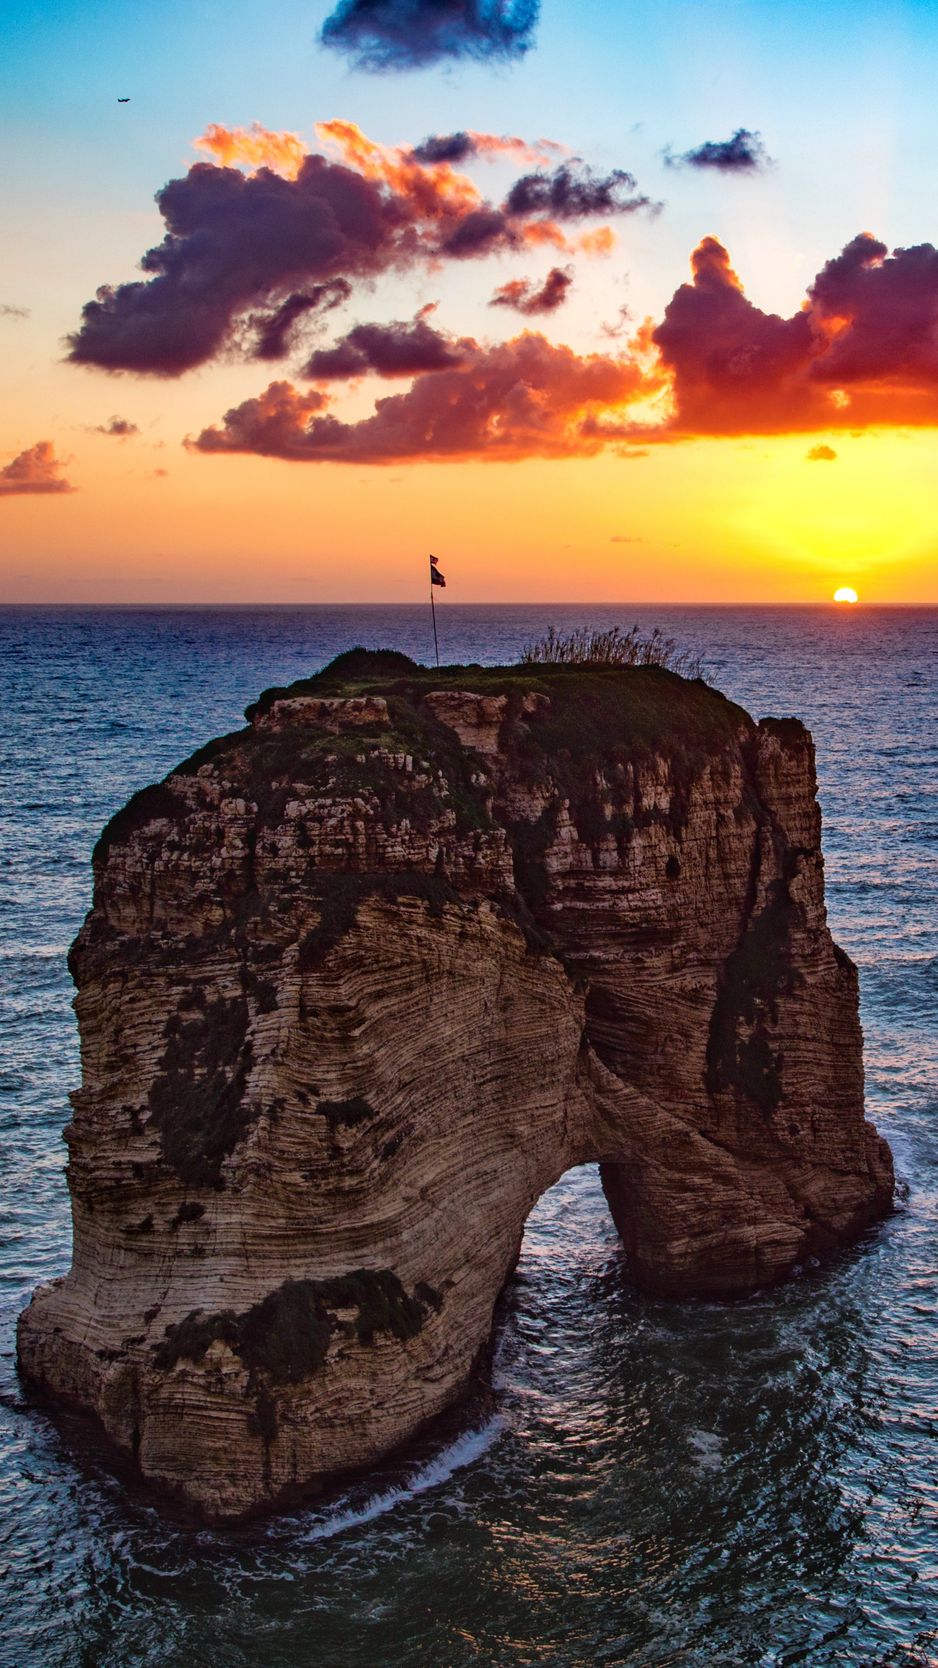 Download wallpaper 938x1668 raouche rocks, beirut, lebanon, sea, sunset  iphone 8/7/6s/6 for parallax hd background